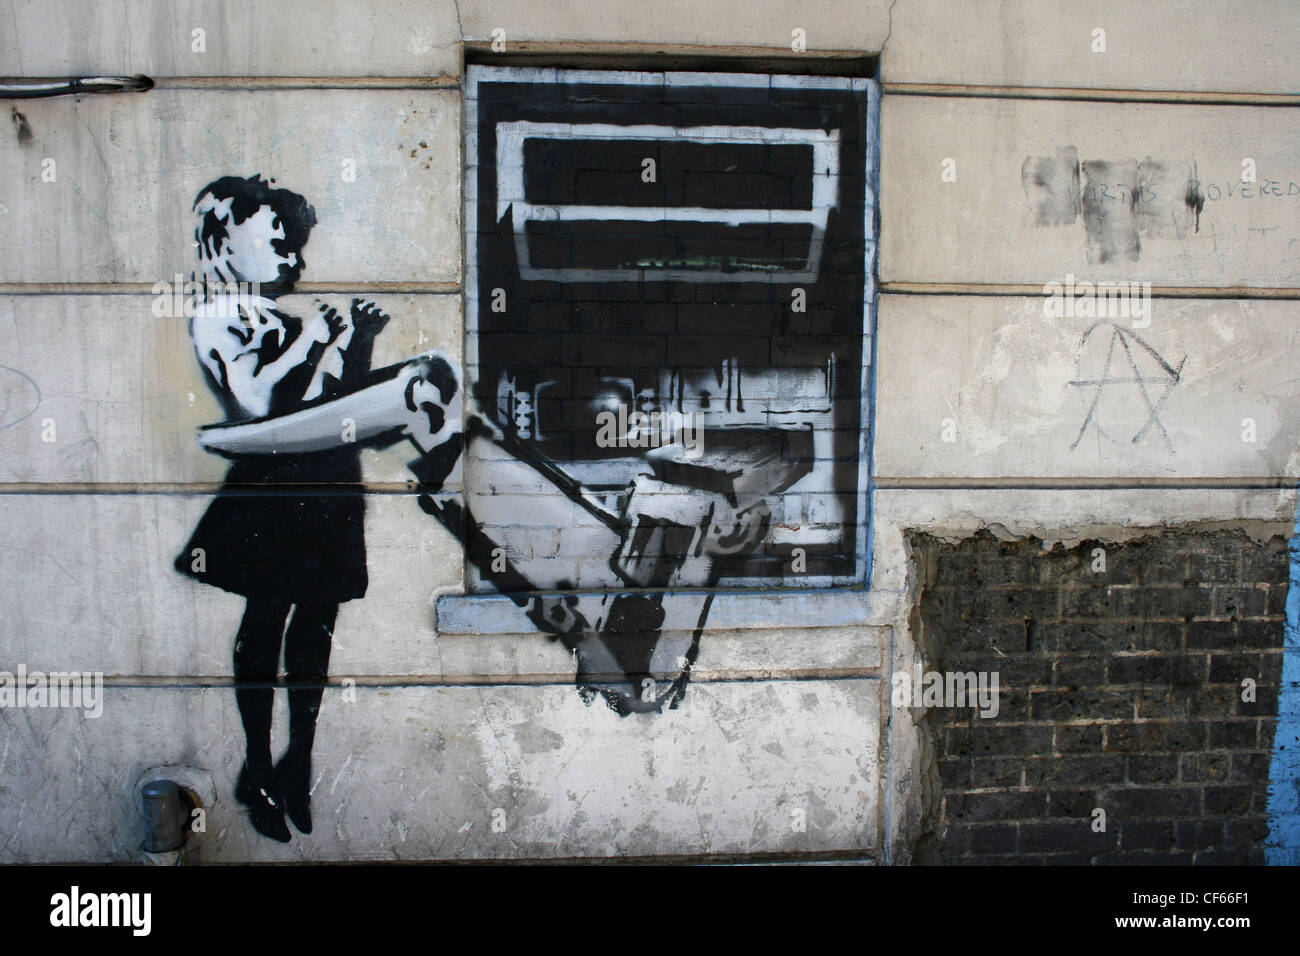 Cash machine graffiti by the artist known as Banksy. Stock Photo